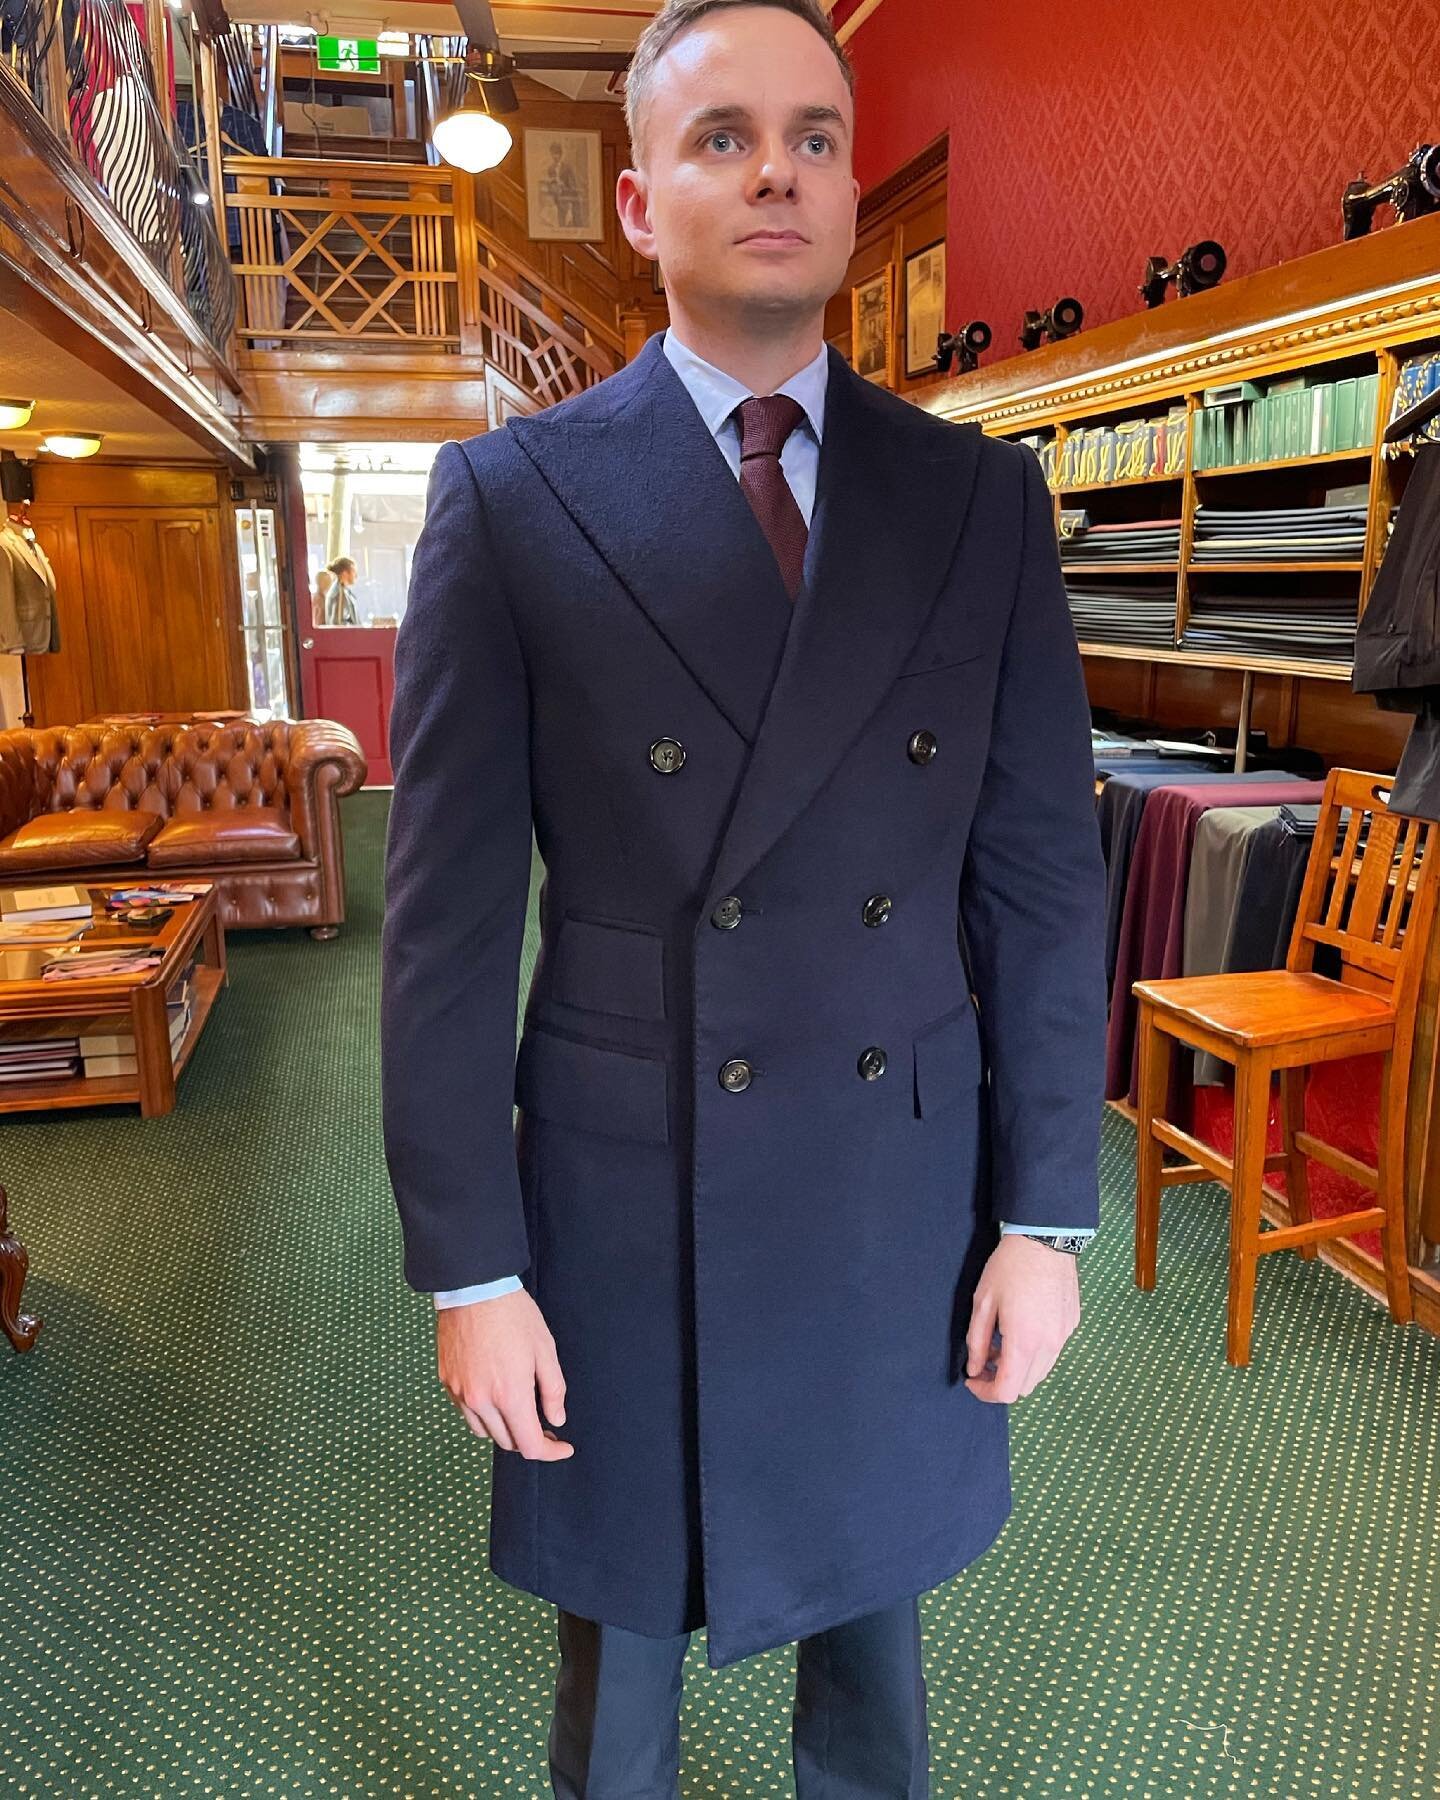 First day of winter! Bespoke pure cashmere overcoat for JM. Perfect timing for an overcoat pick up as this weather really starts to cool down. Cashmere by @huddersfieldfineworsted #cashmere #cashmereovercoat